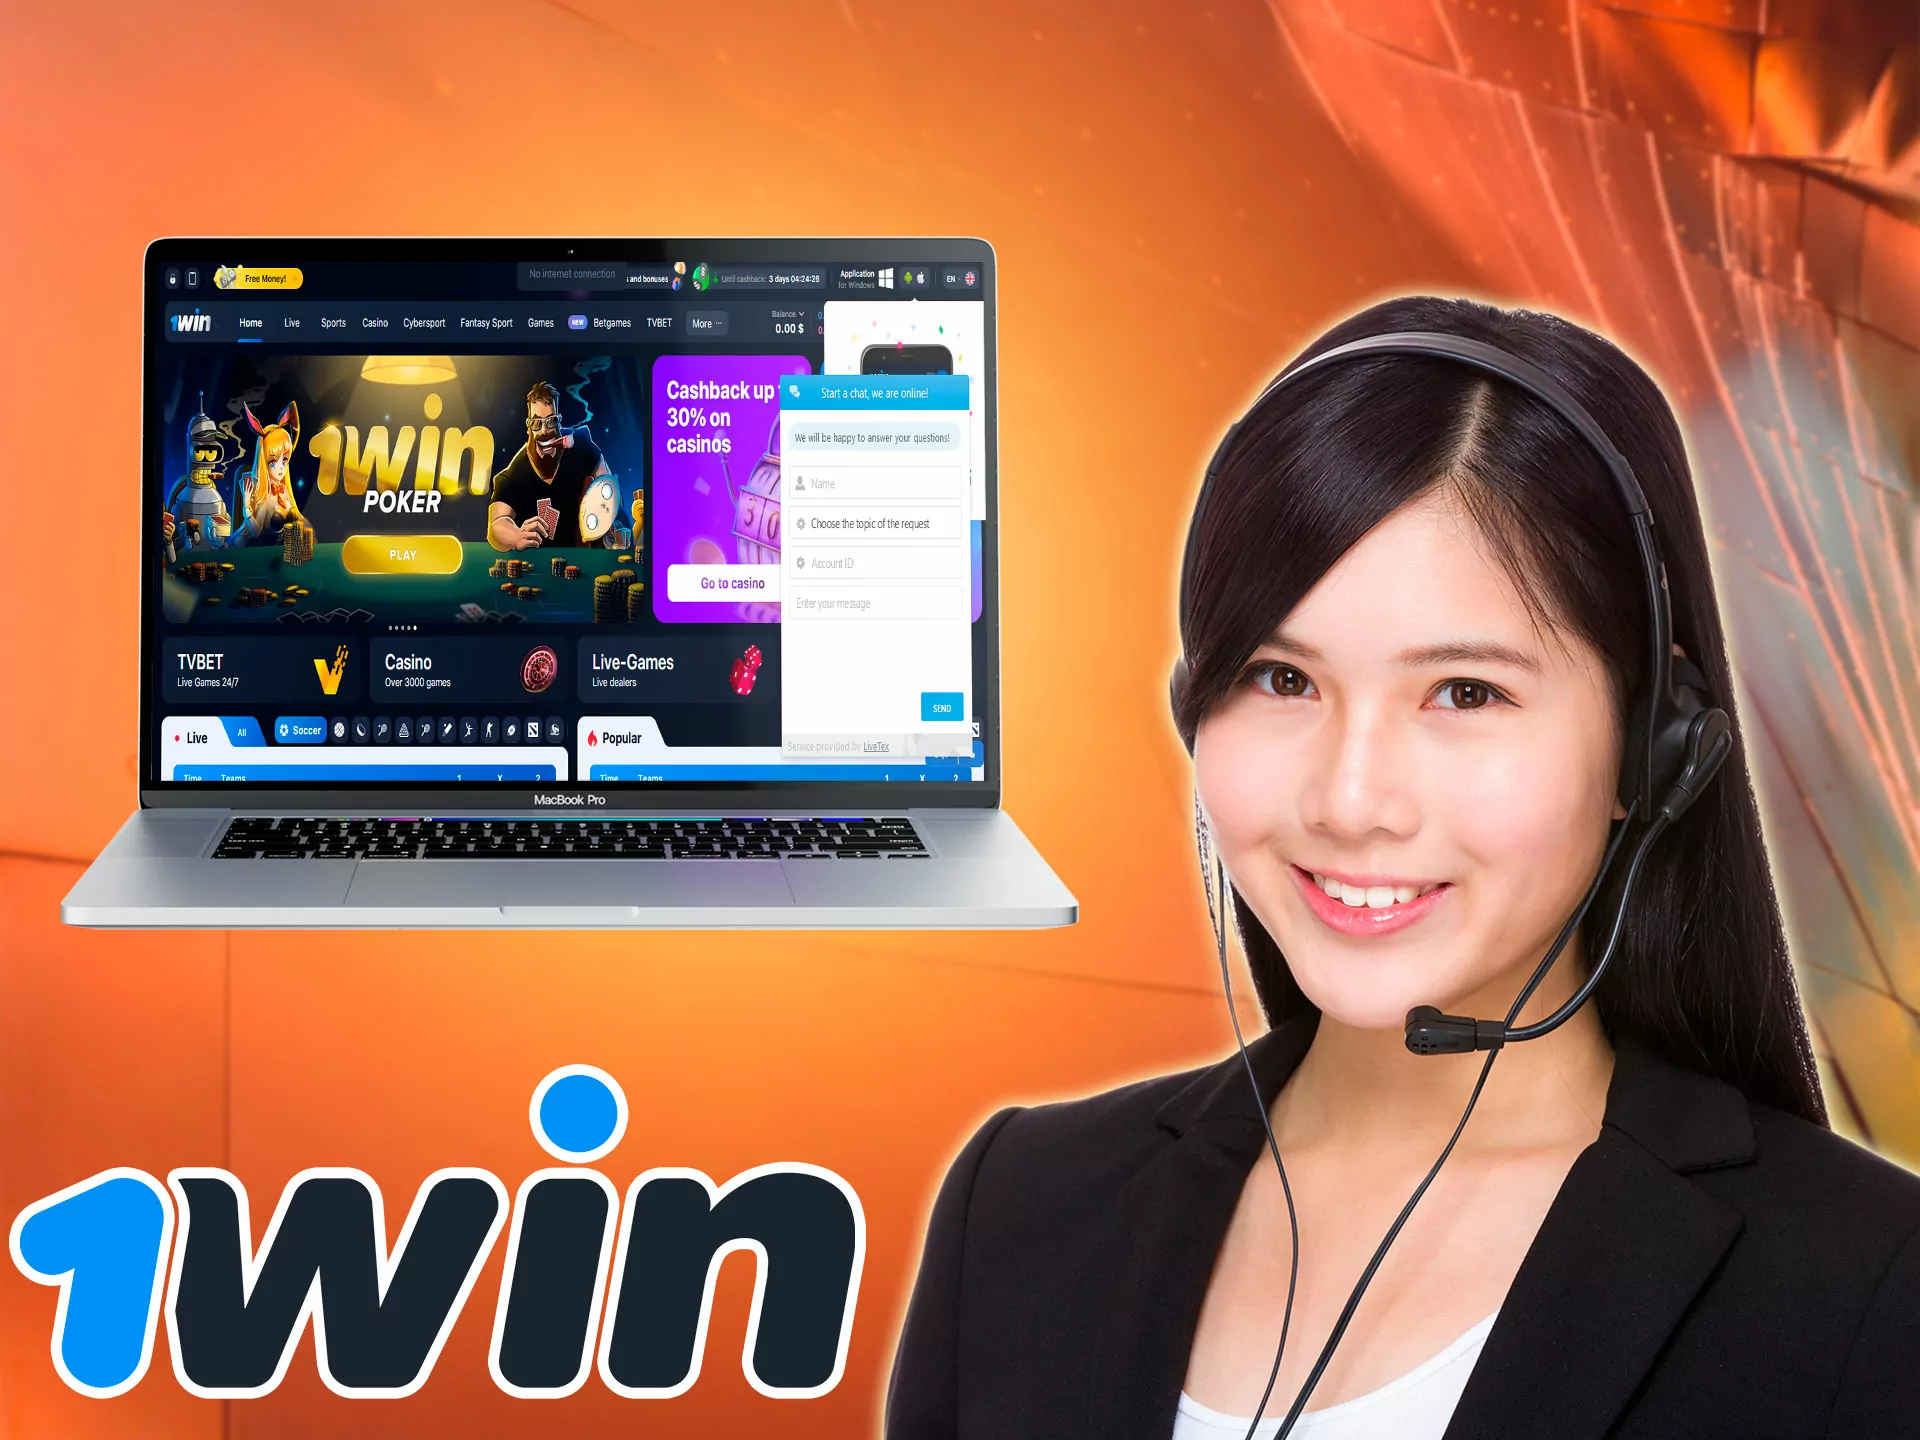 Don't Waste Time! 5 Facts To Start 1win online